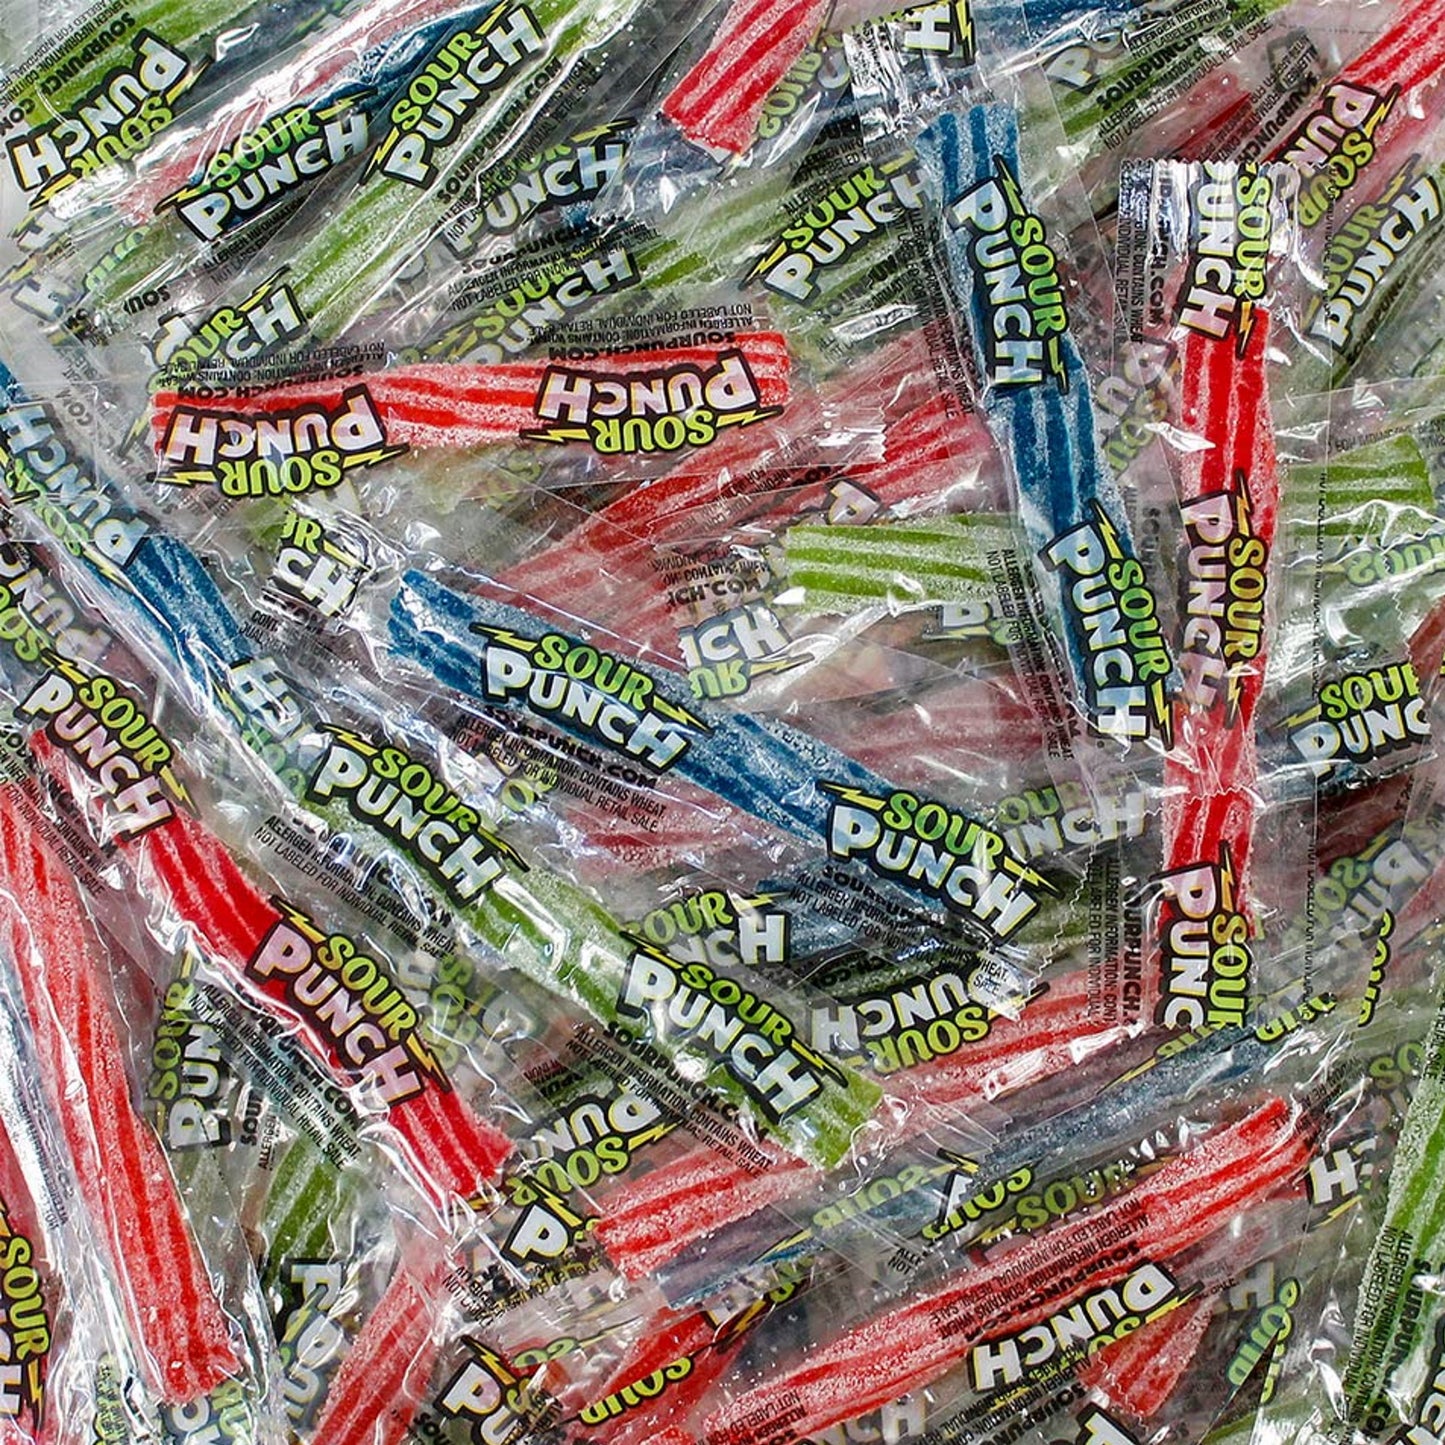 Sour Punch Straw Bulk Wrapped Candy 2LB Bag of Sour Punch Twists- Sour Candy Variety Pack, Sour Candy Bulk 2LB Bag by Snackivore.